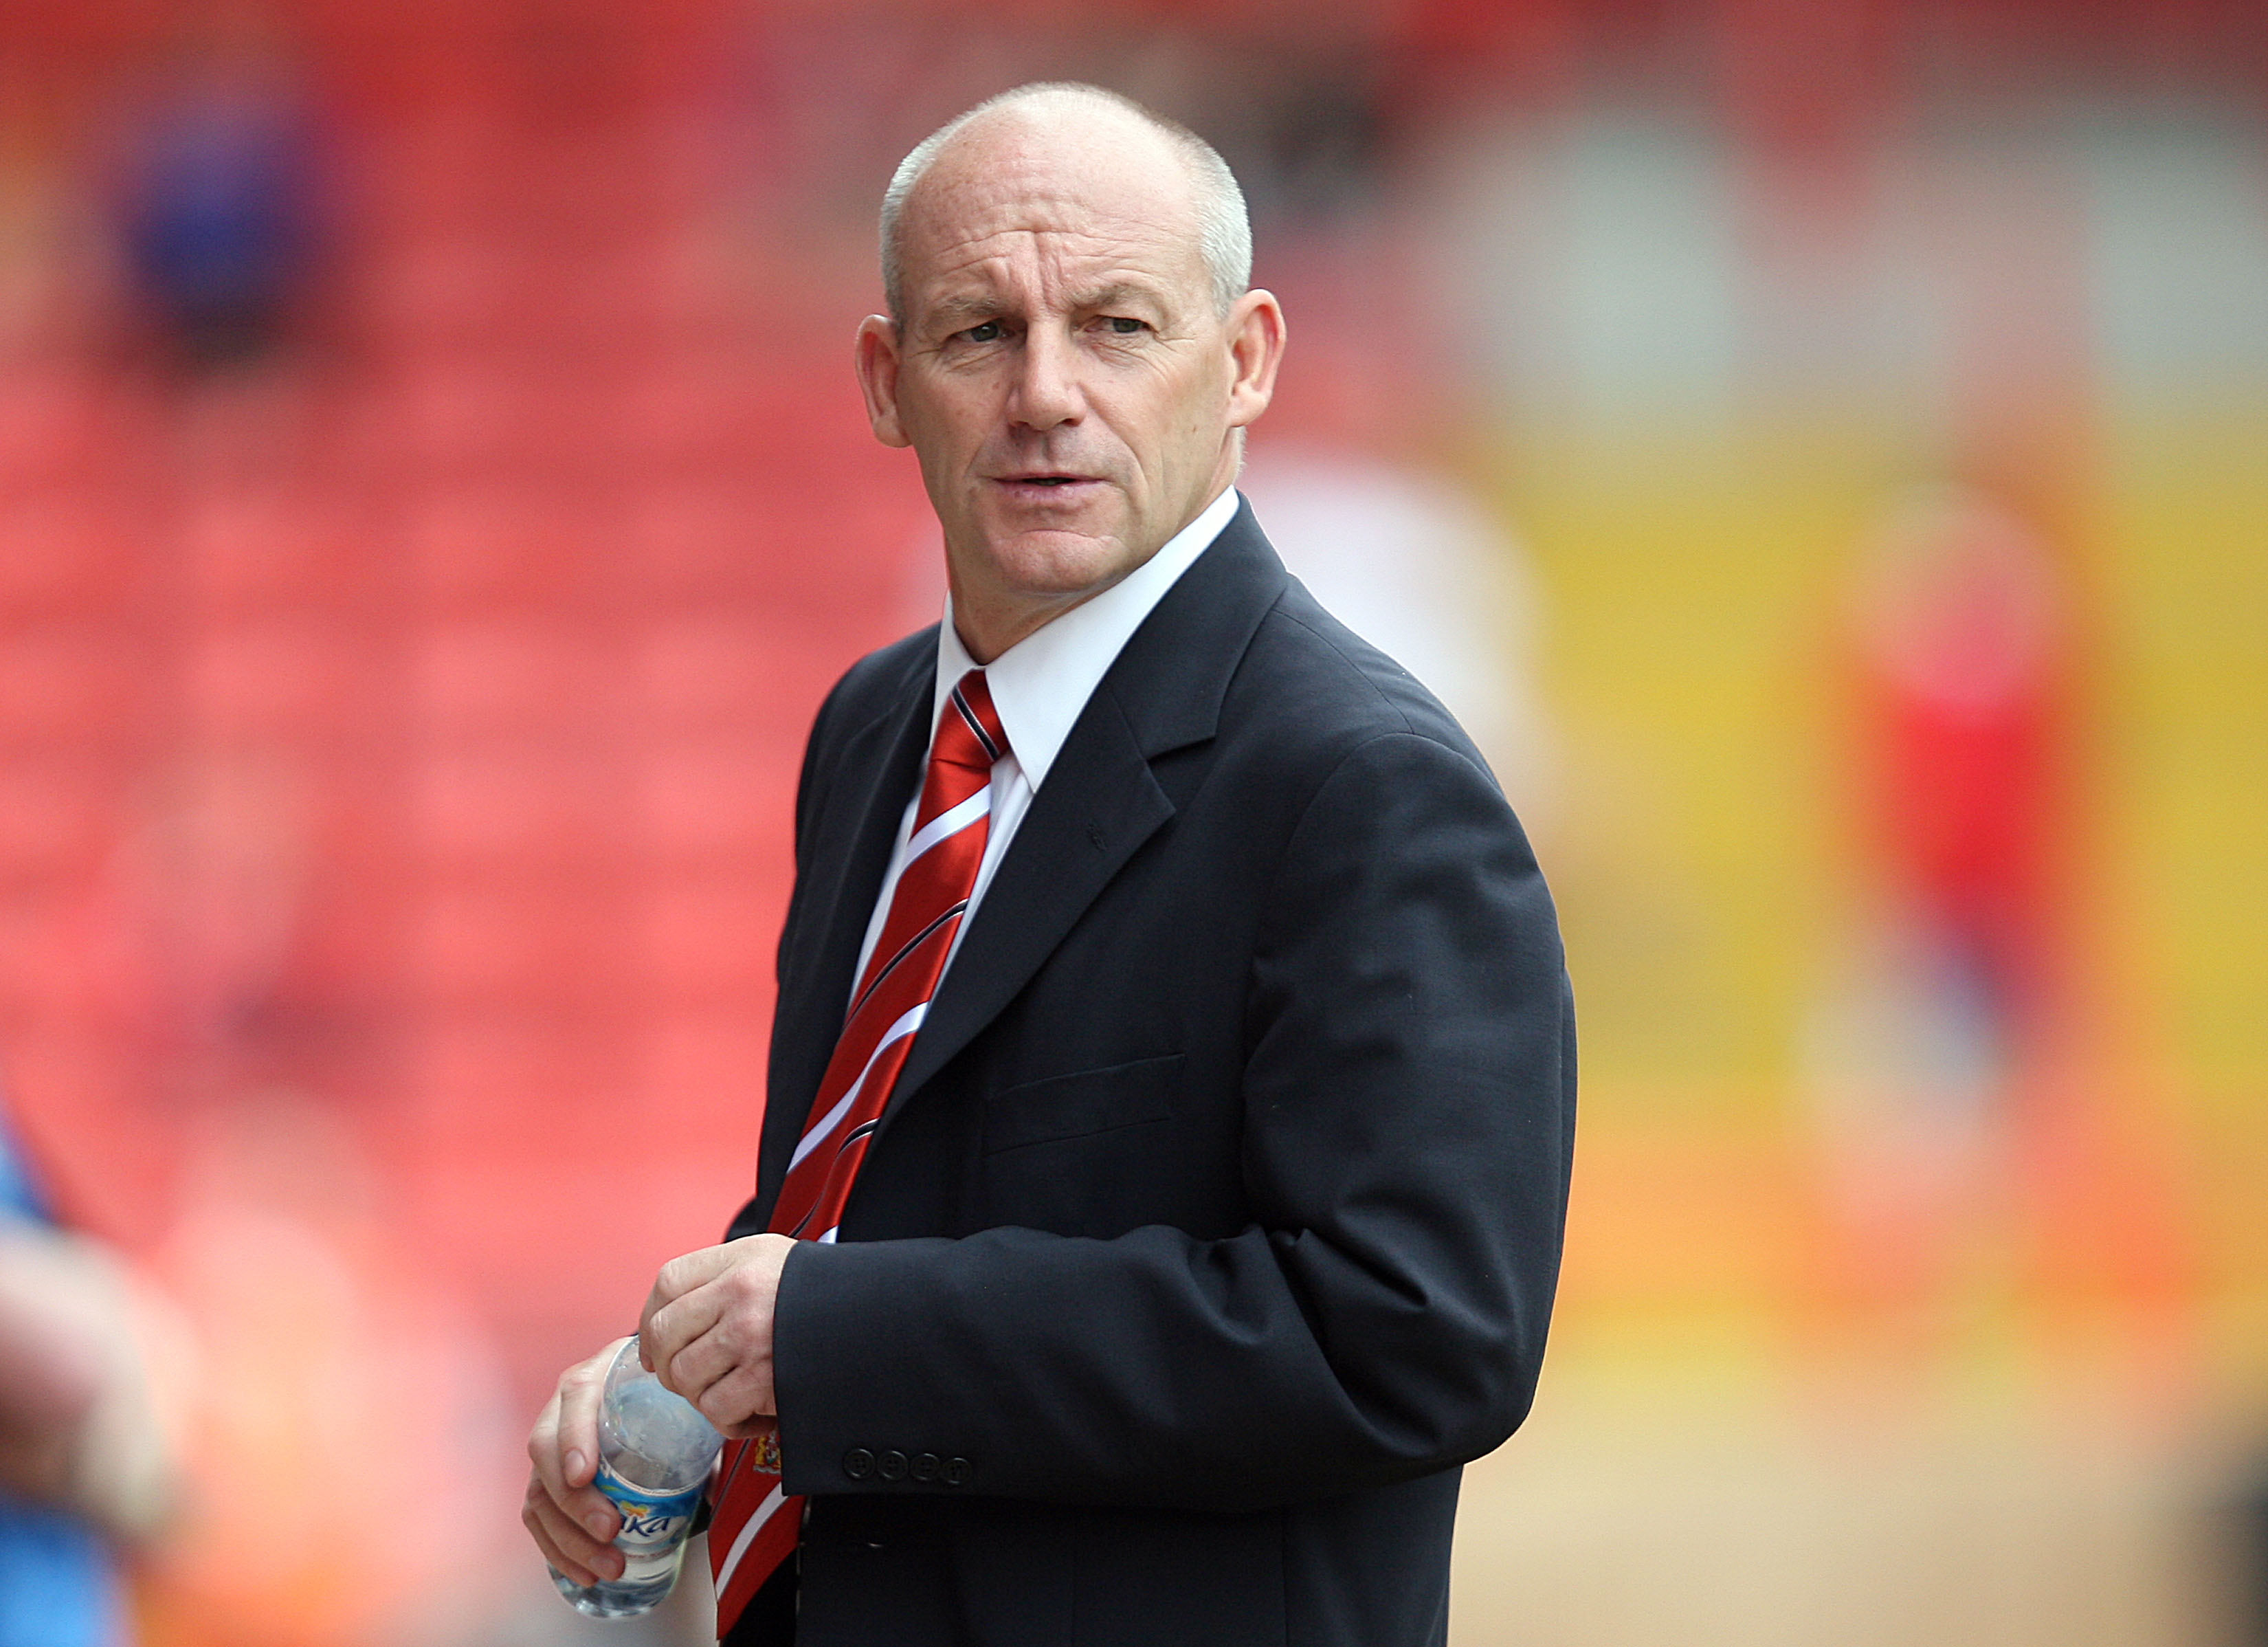 Steve Coppell calls the ISL job as one of the biggest challenges in football